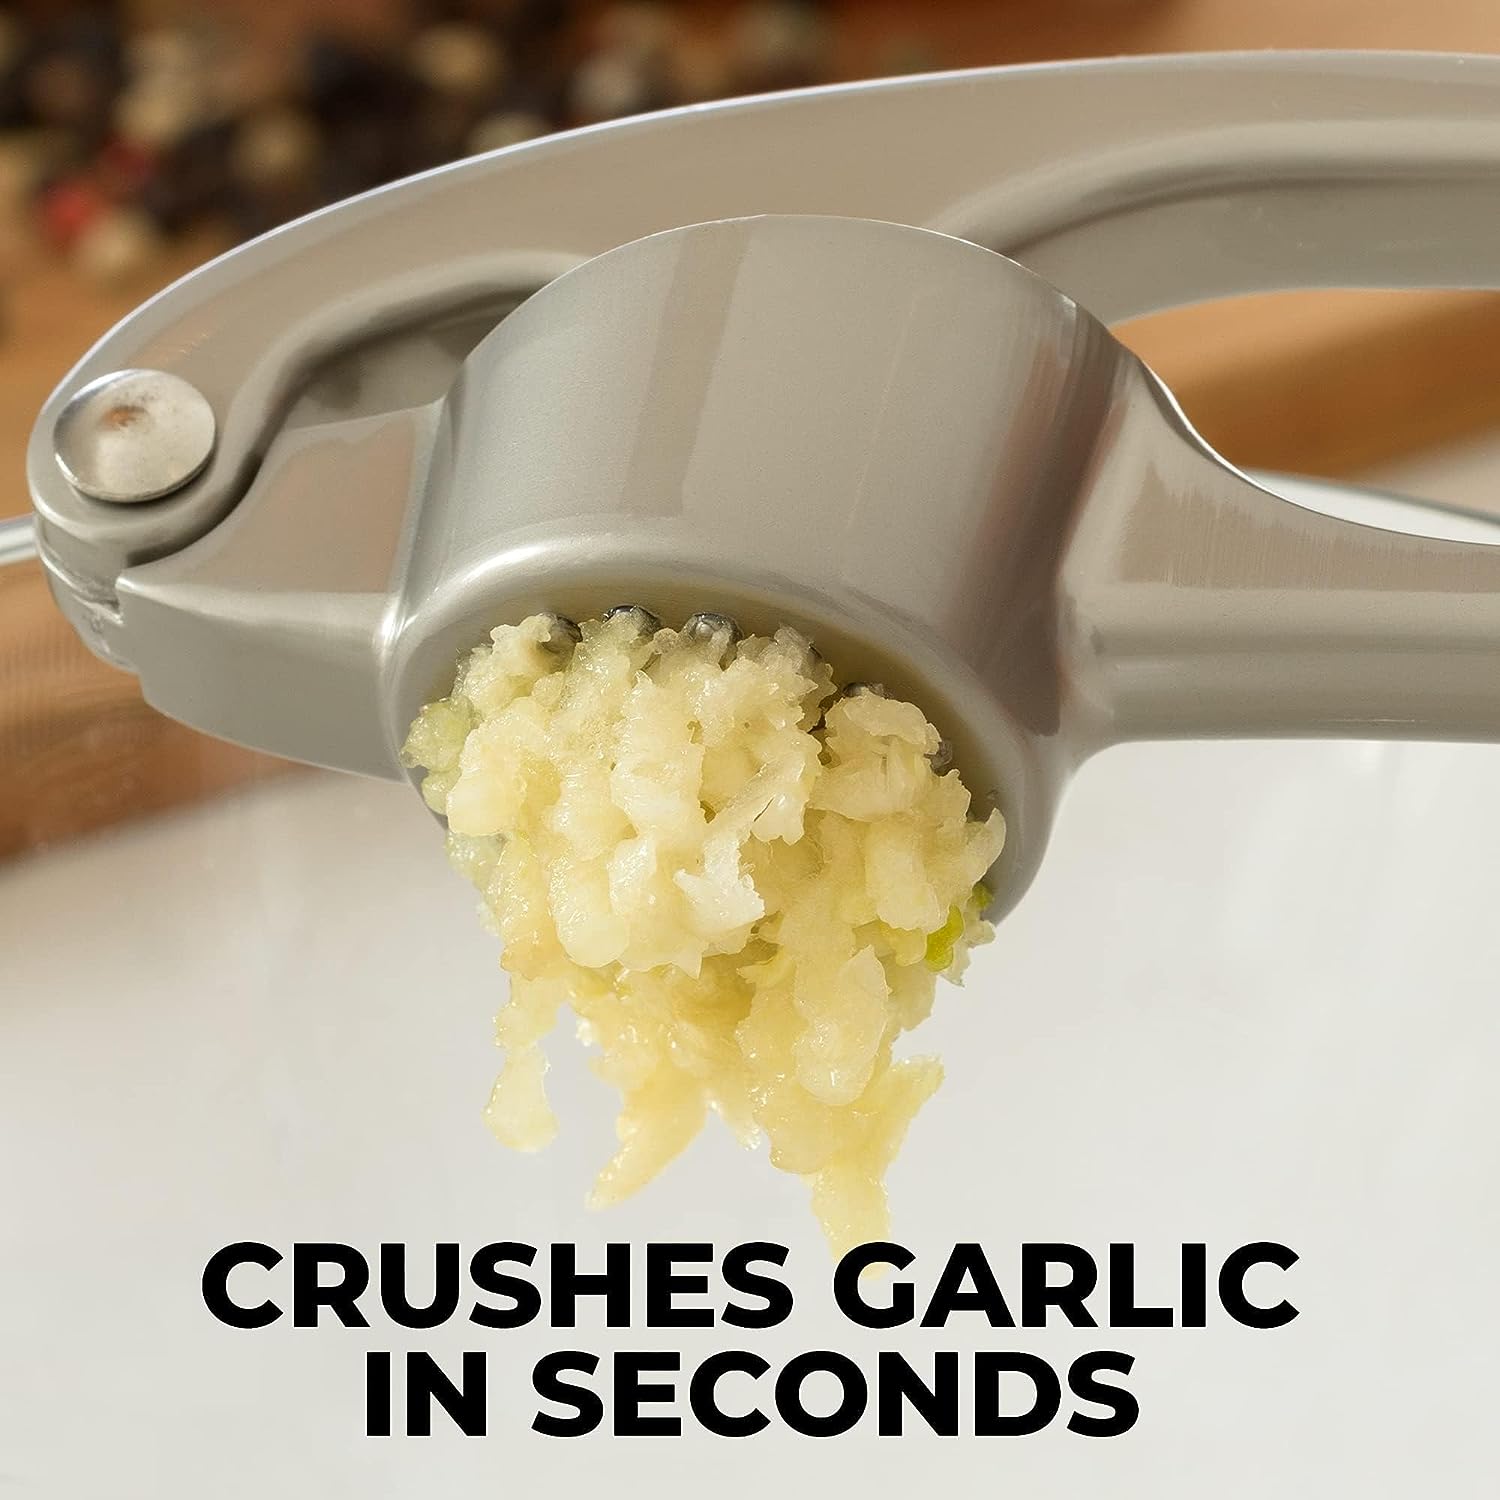 Our Point of View on Zulay Kitchen Garlic Press 